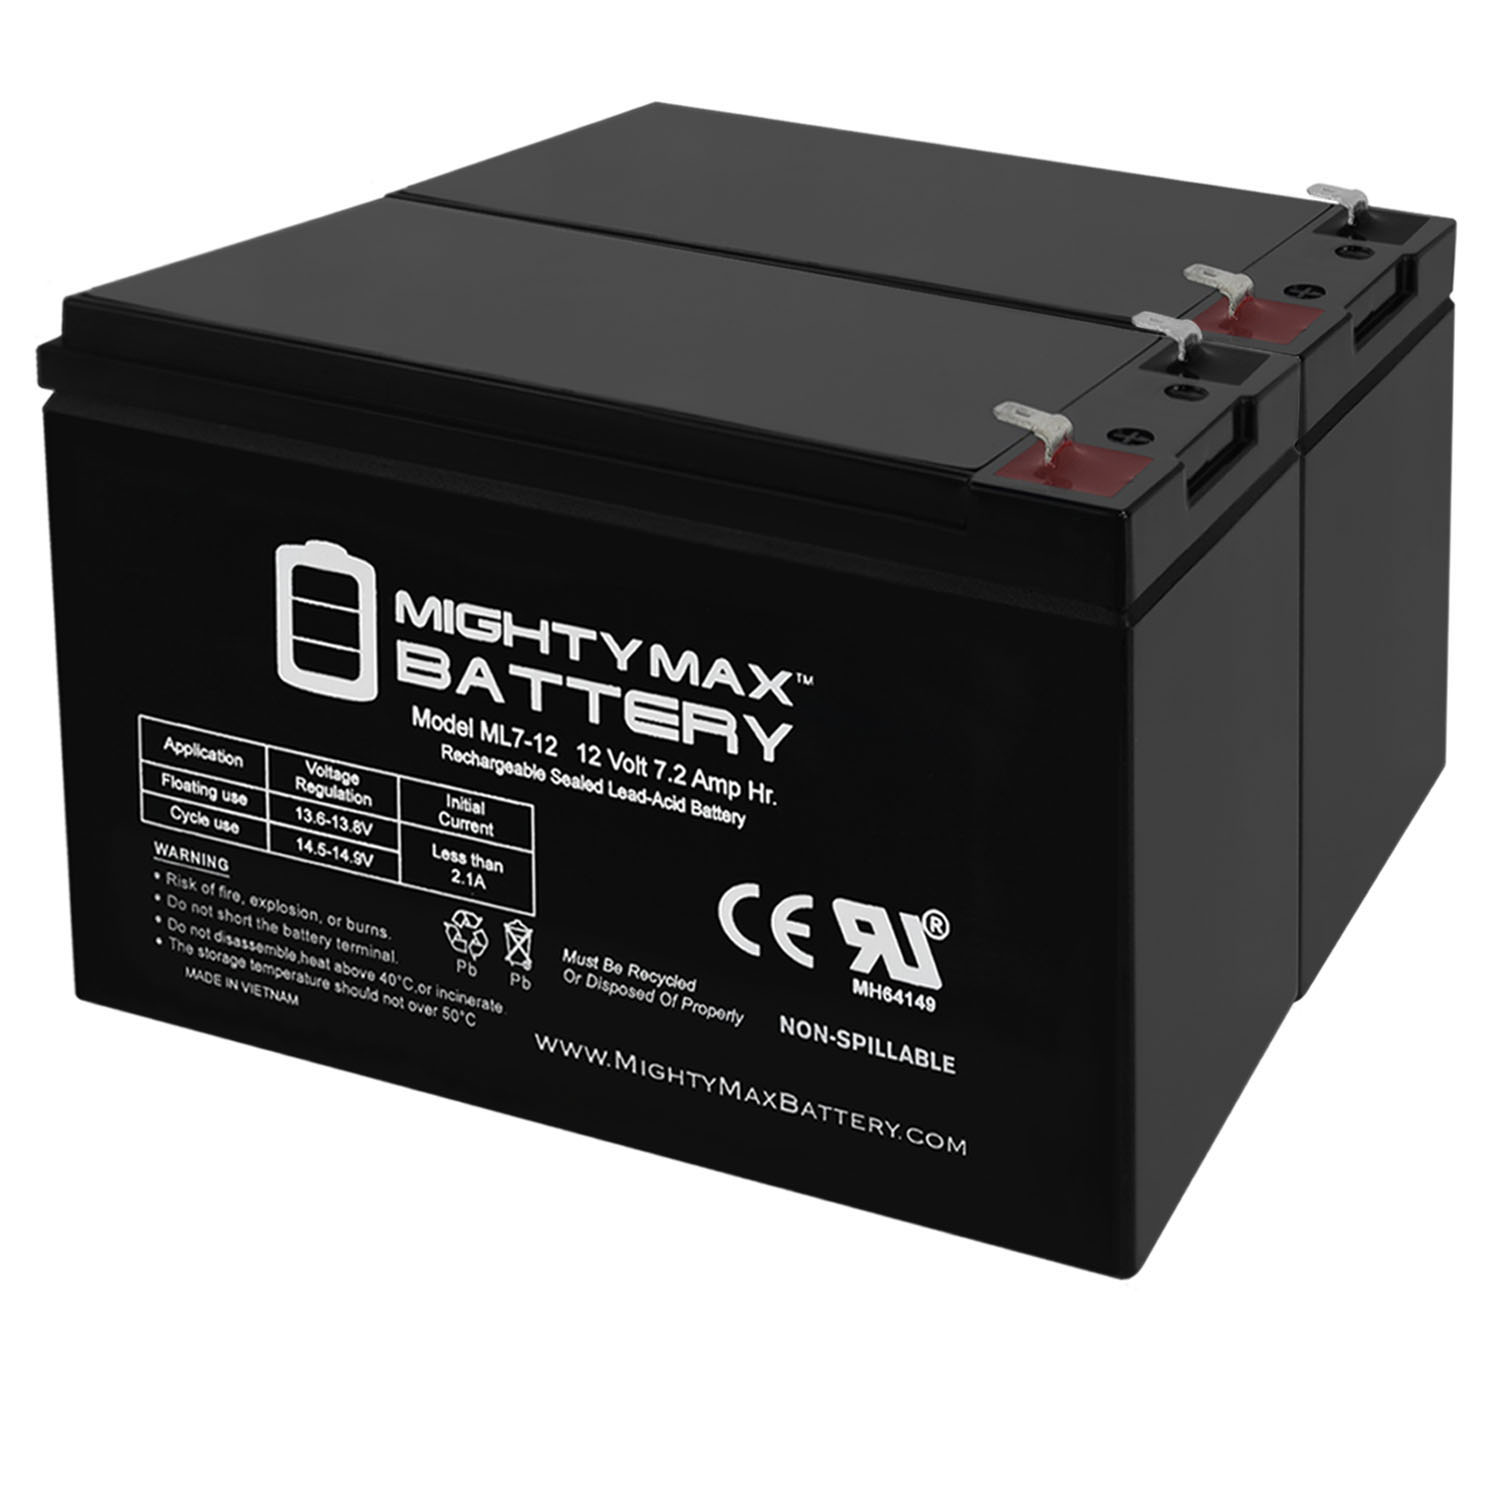 ML7-12 - 12V 7.2AH GS Portalac PX12072 Replacement Battery - 2 Pack